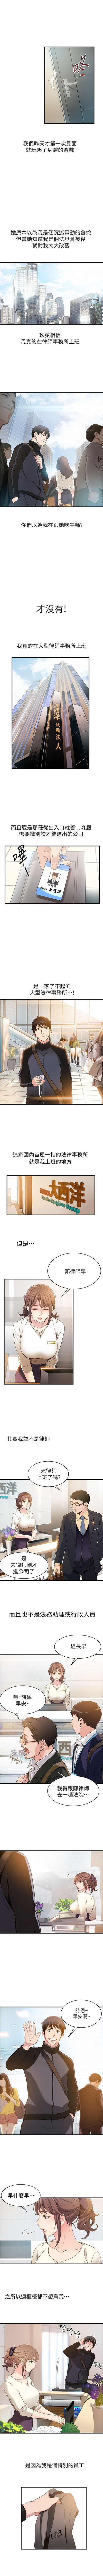 Naked 弱點 1-90 官方中文（連載中） Aunt - Page 4